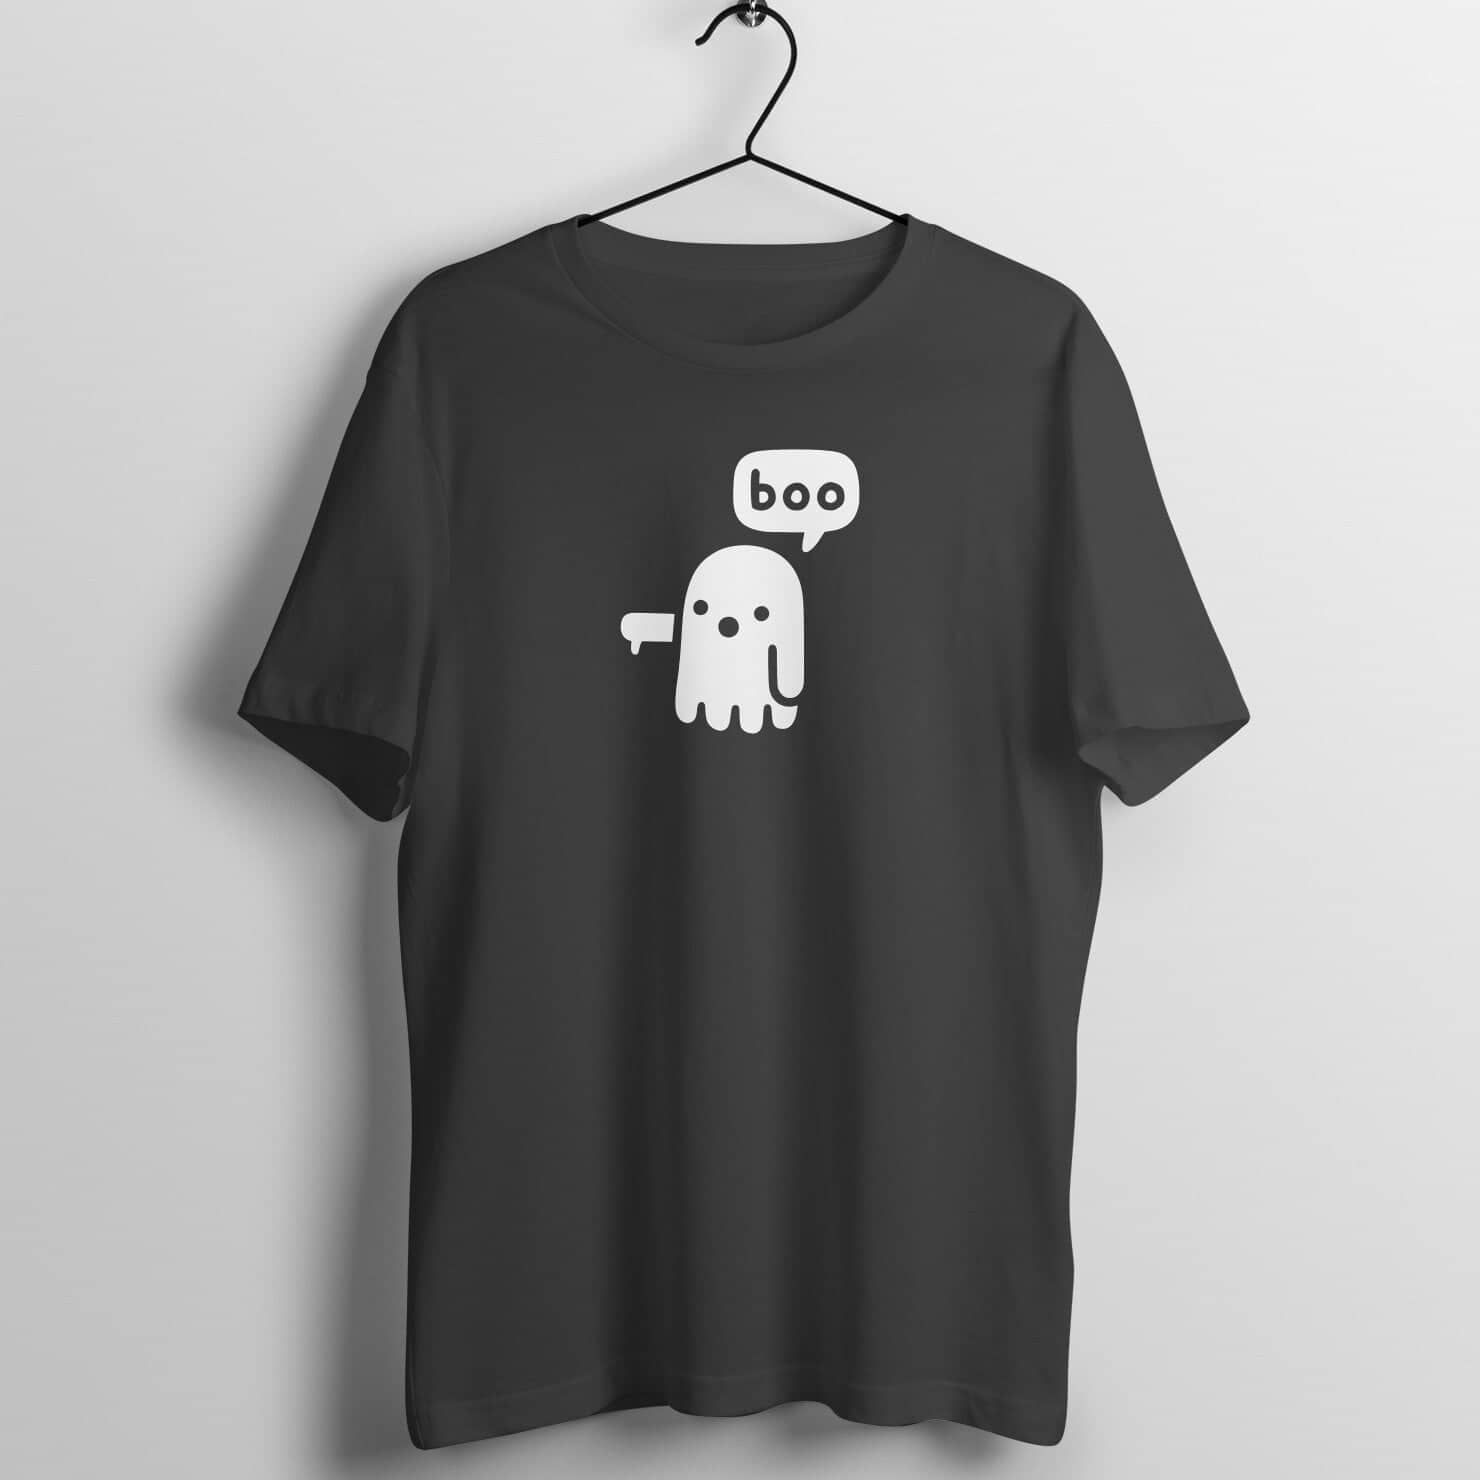 Ghost Boo Funny Black T Shirt for Men and Women freeshipping - Catch My Drift India